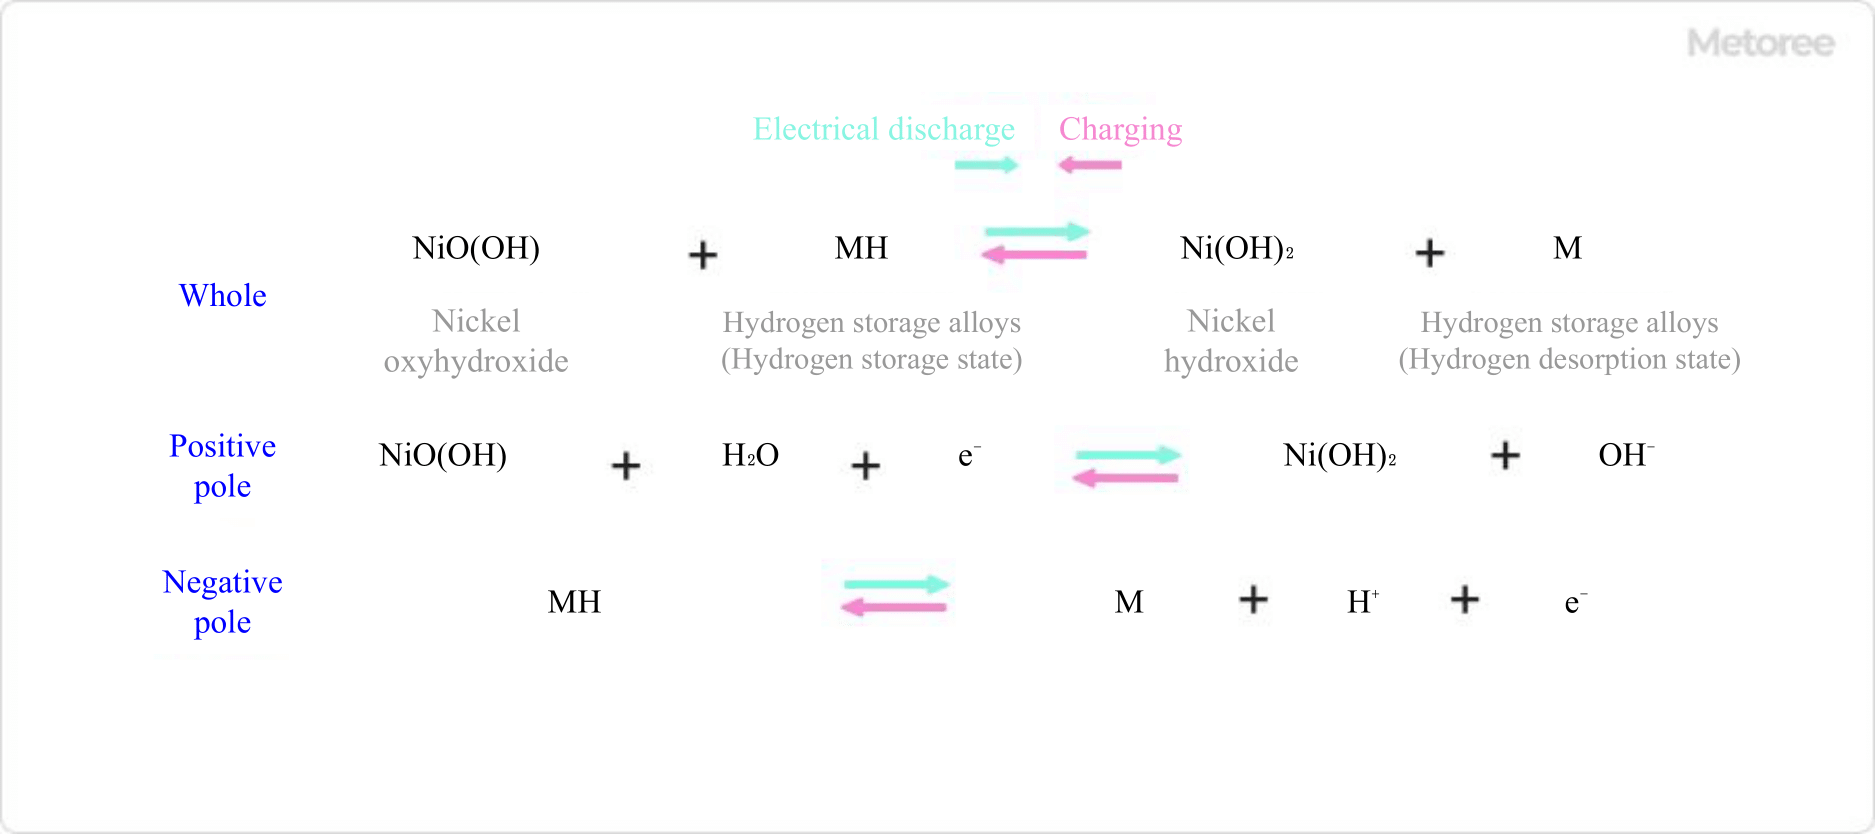 Figure 1. Charge-discharge reaction equation of a nickel-metal hydride battery